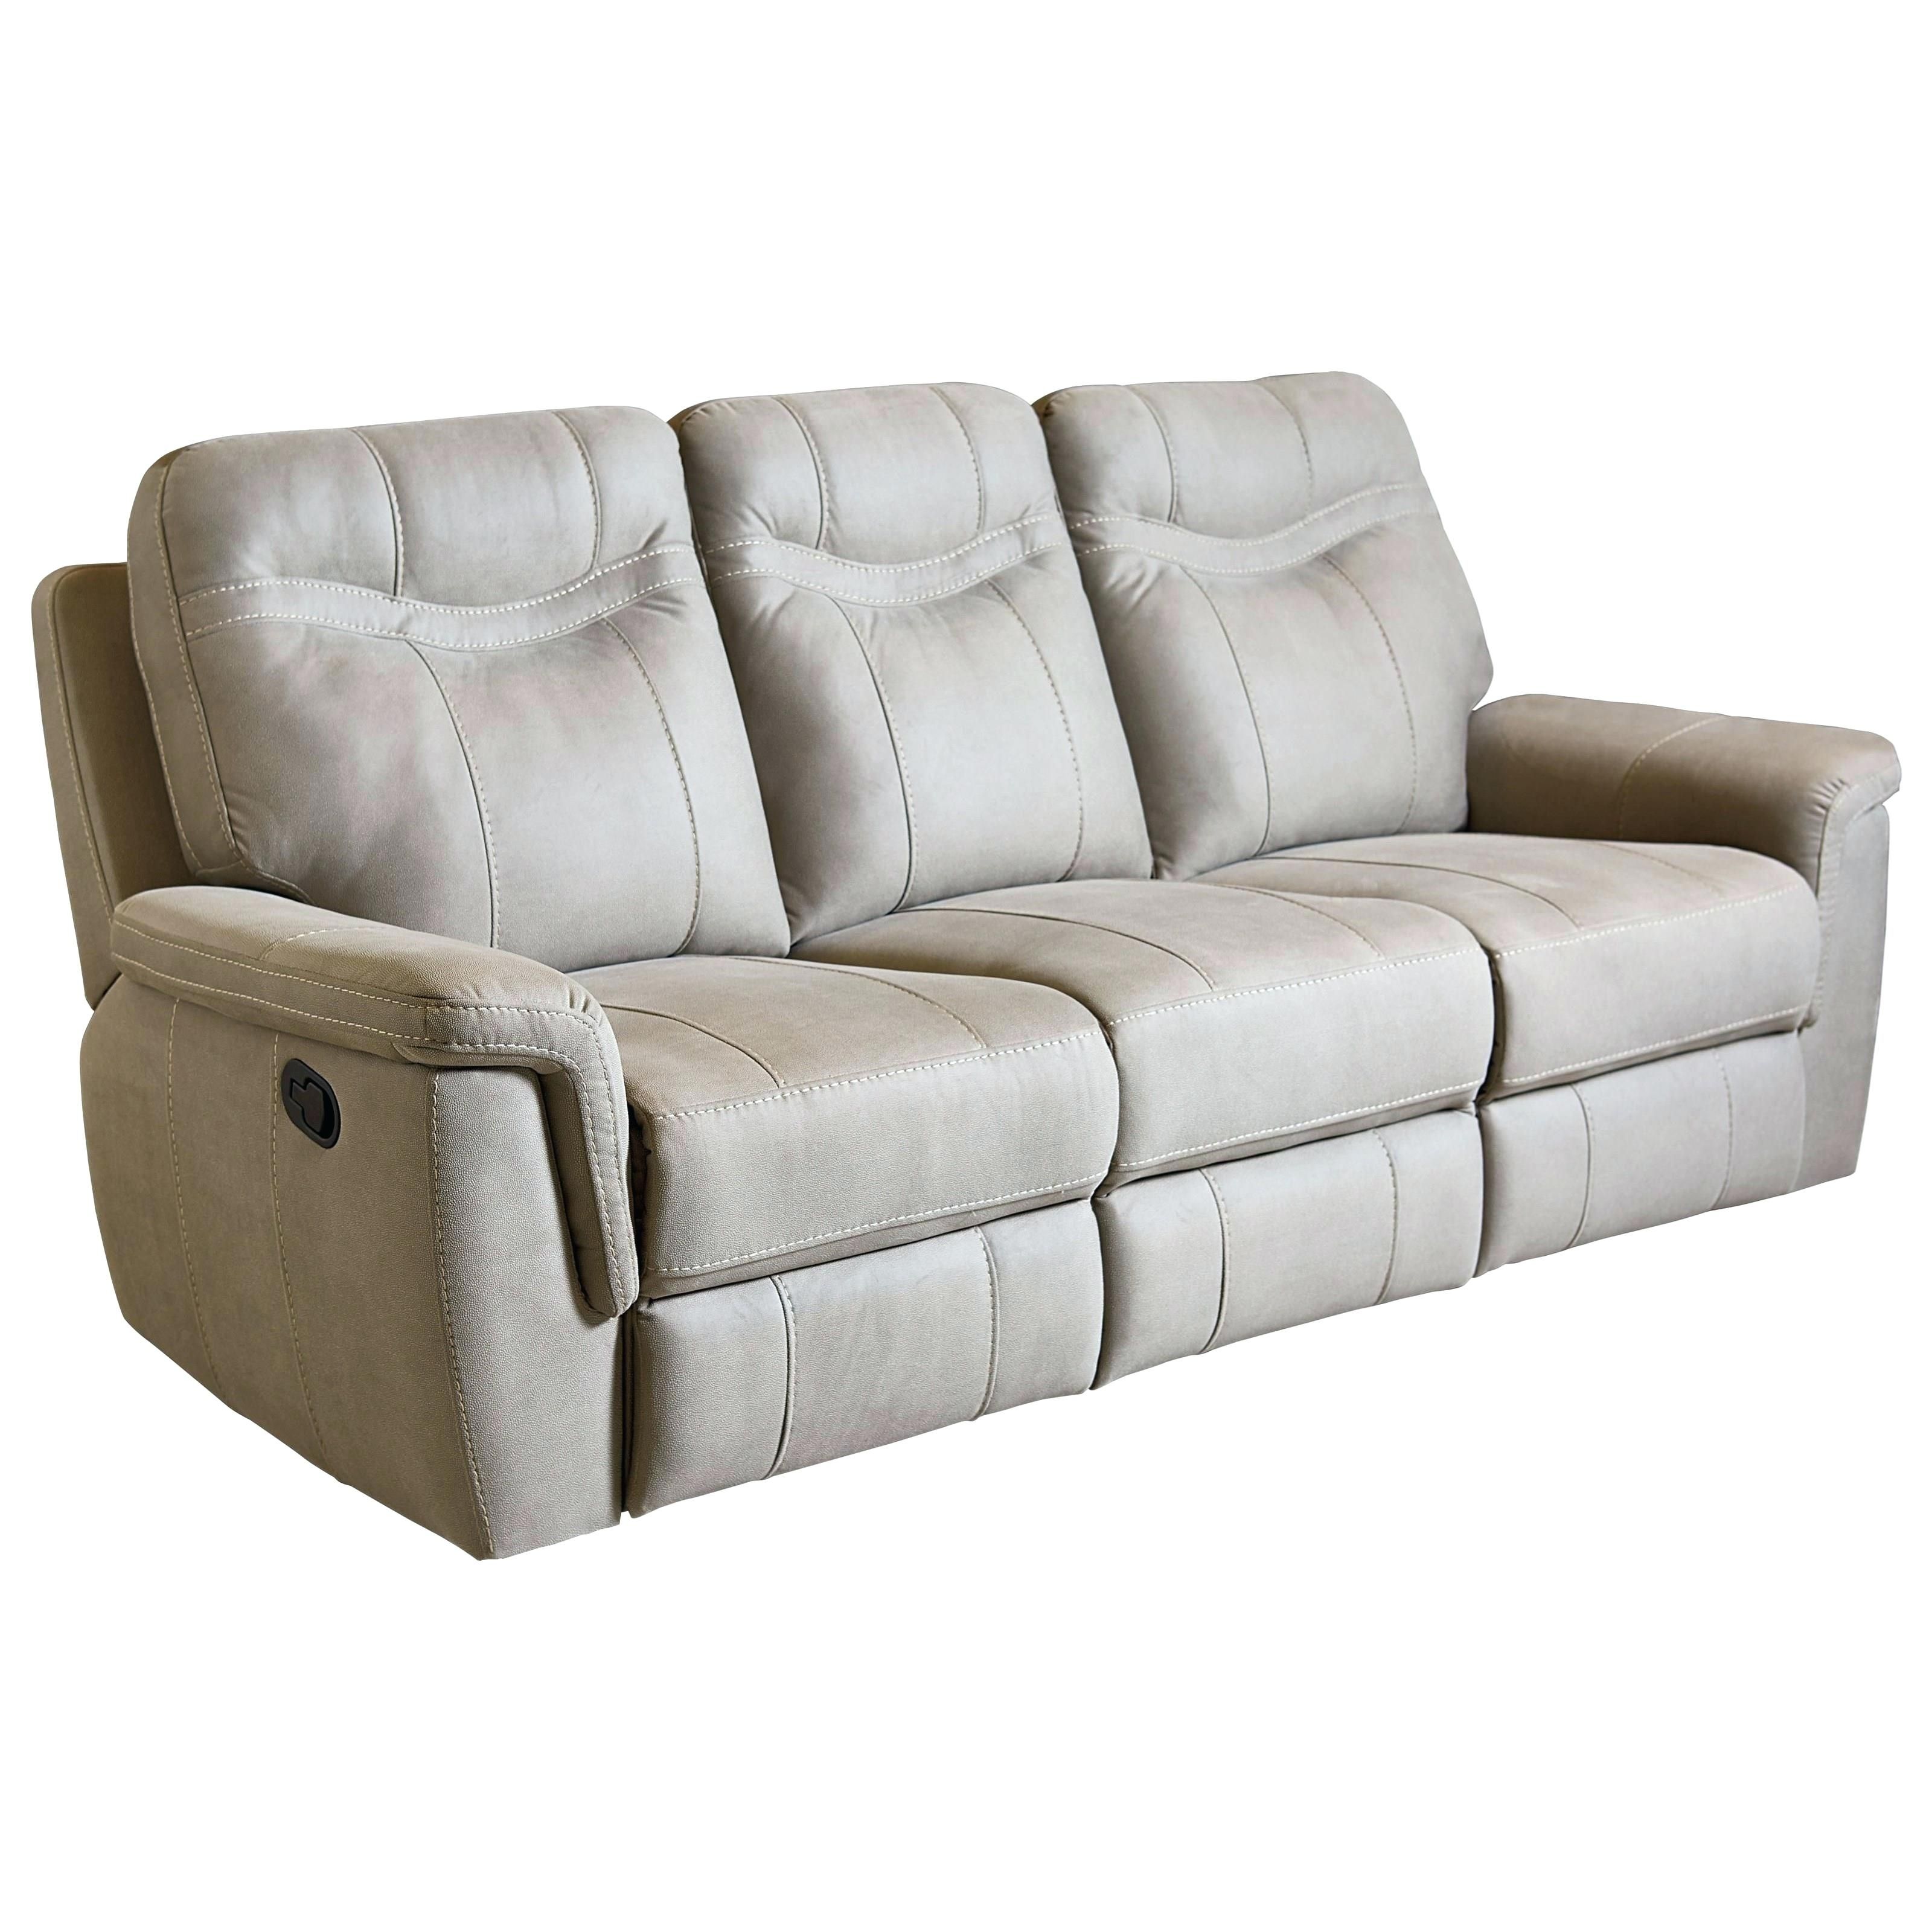 Reclining Sofas Sofa Leather Brown Recliner For Sale In London Kijiji – Throughout Kijiji London Sectional Sofas (View 9 of 10)